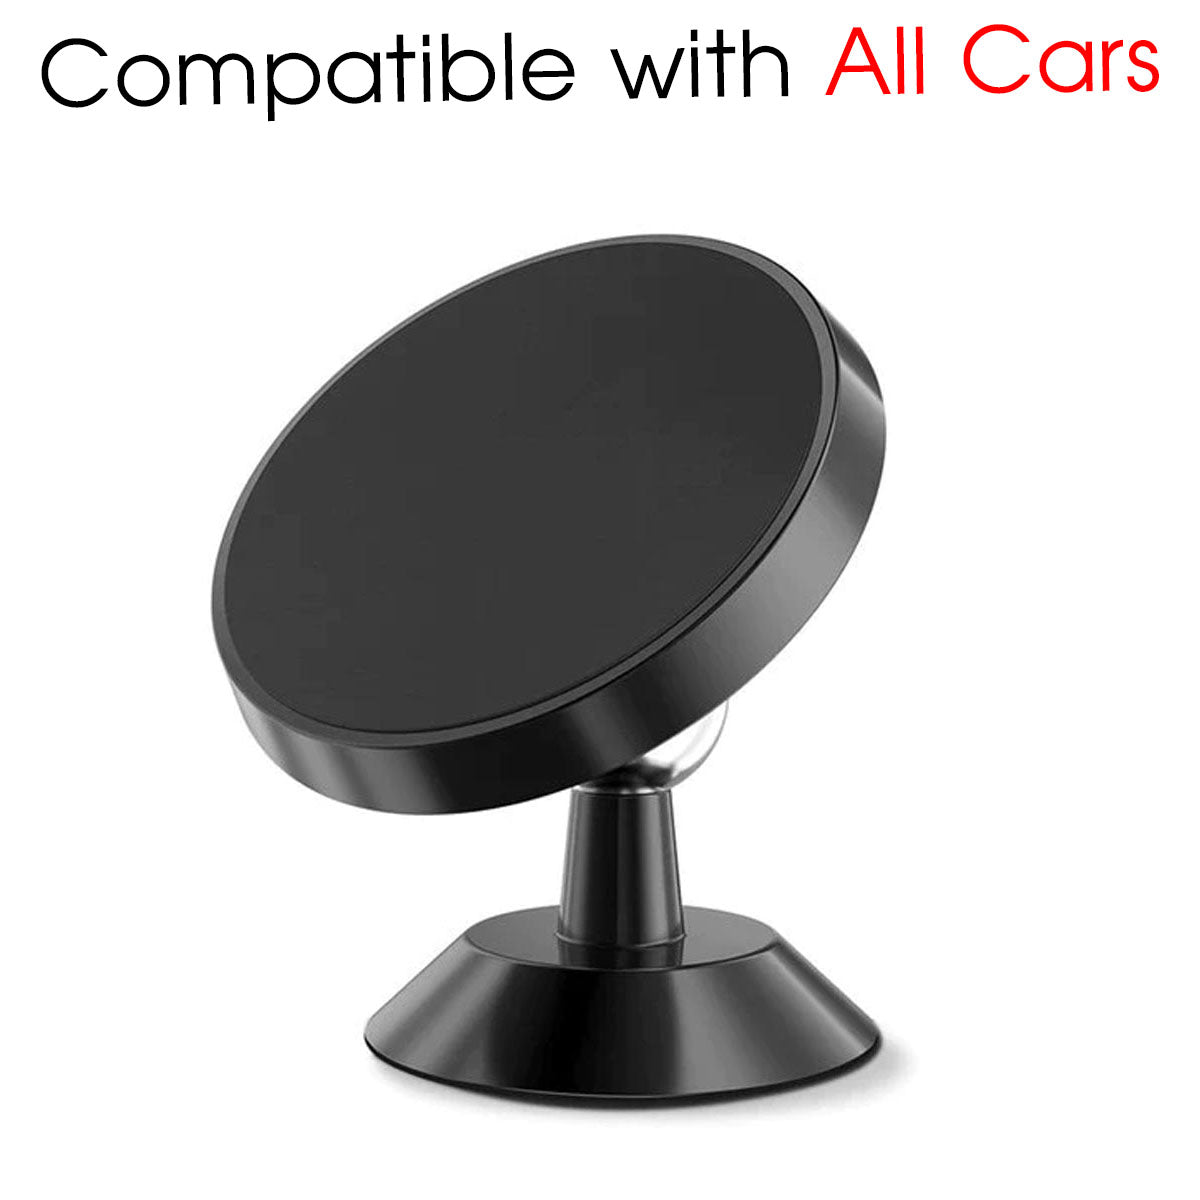 [2 Pack ] Magnetic Phone Mount, Custom For Your Cars, [ Super Strong Magnet ] [ with 4 Metal Plate ] car Magnetic Phone Holder, [ 360° Rotation ] Universal Dashboard car Mount Fits All Cell Phones, Car Accessories FJ13982